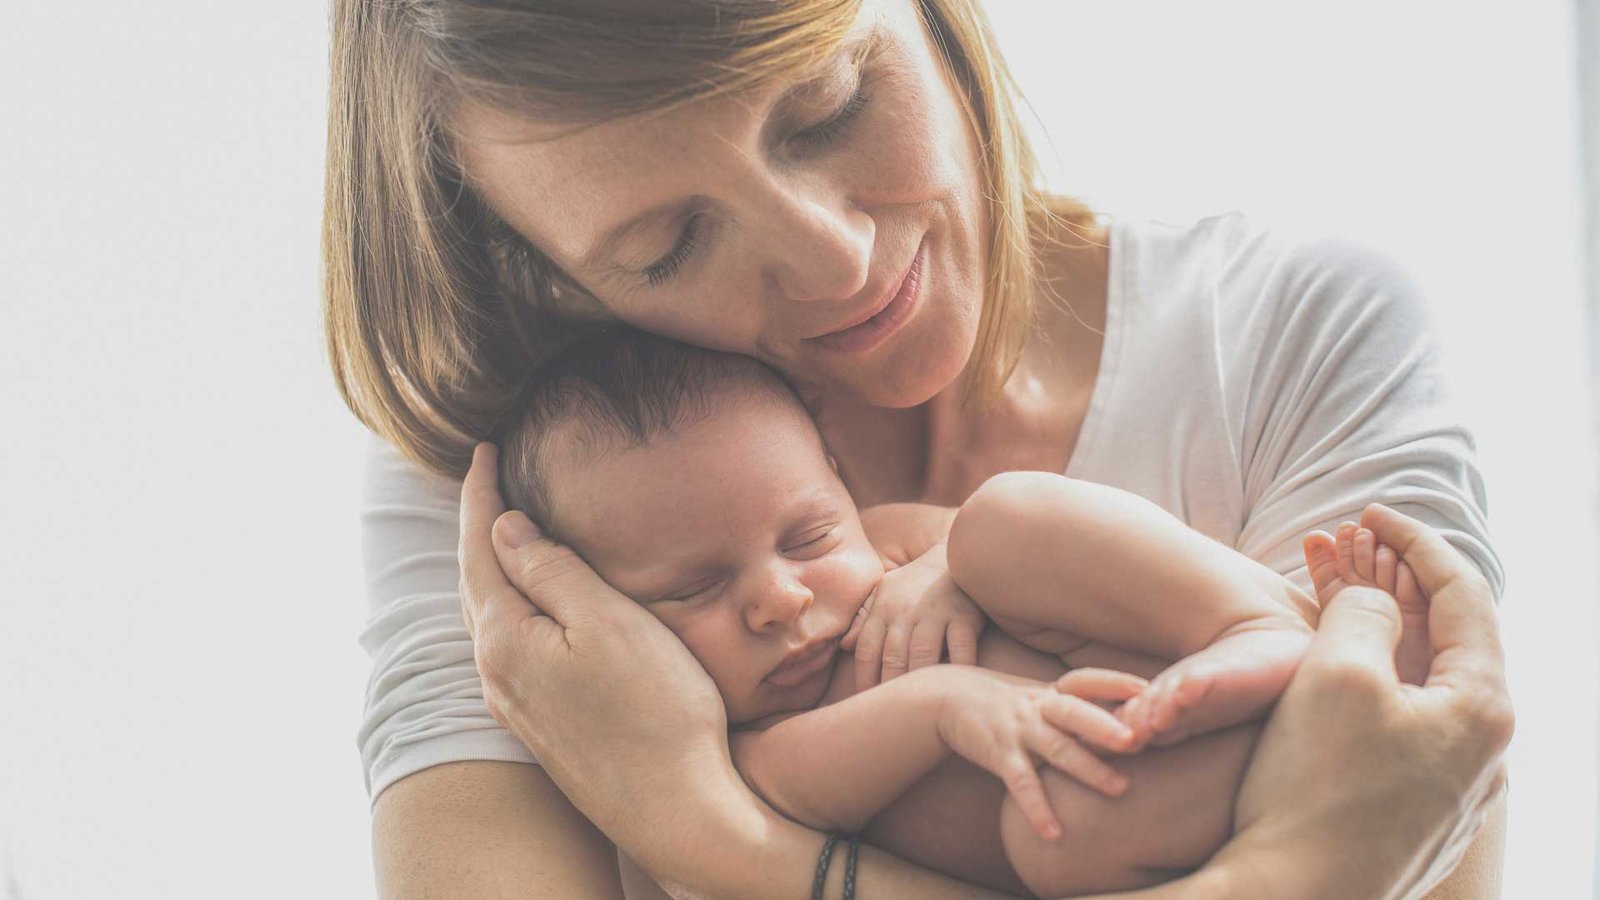 Newborn Parenting Is Not So Easy, but You Can Do It